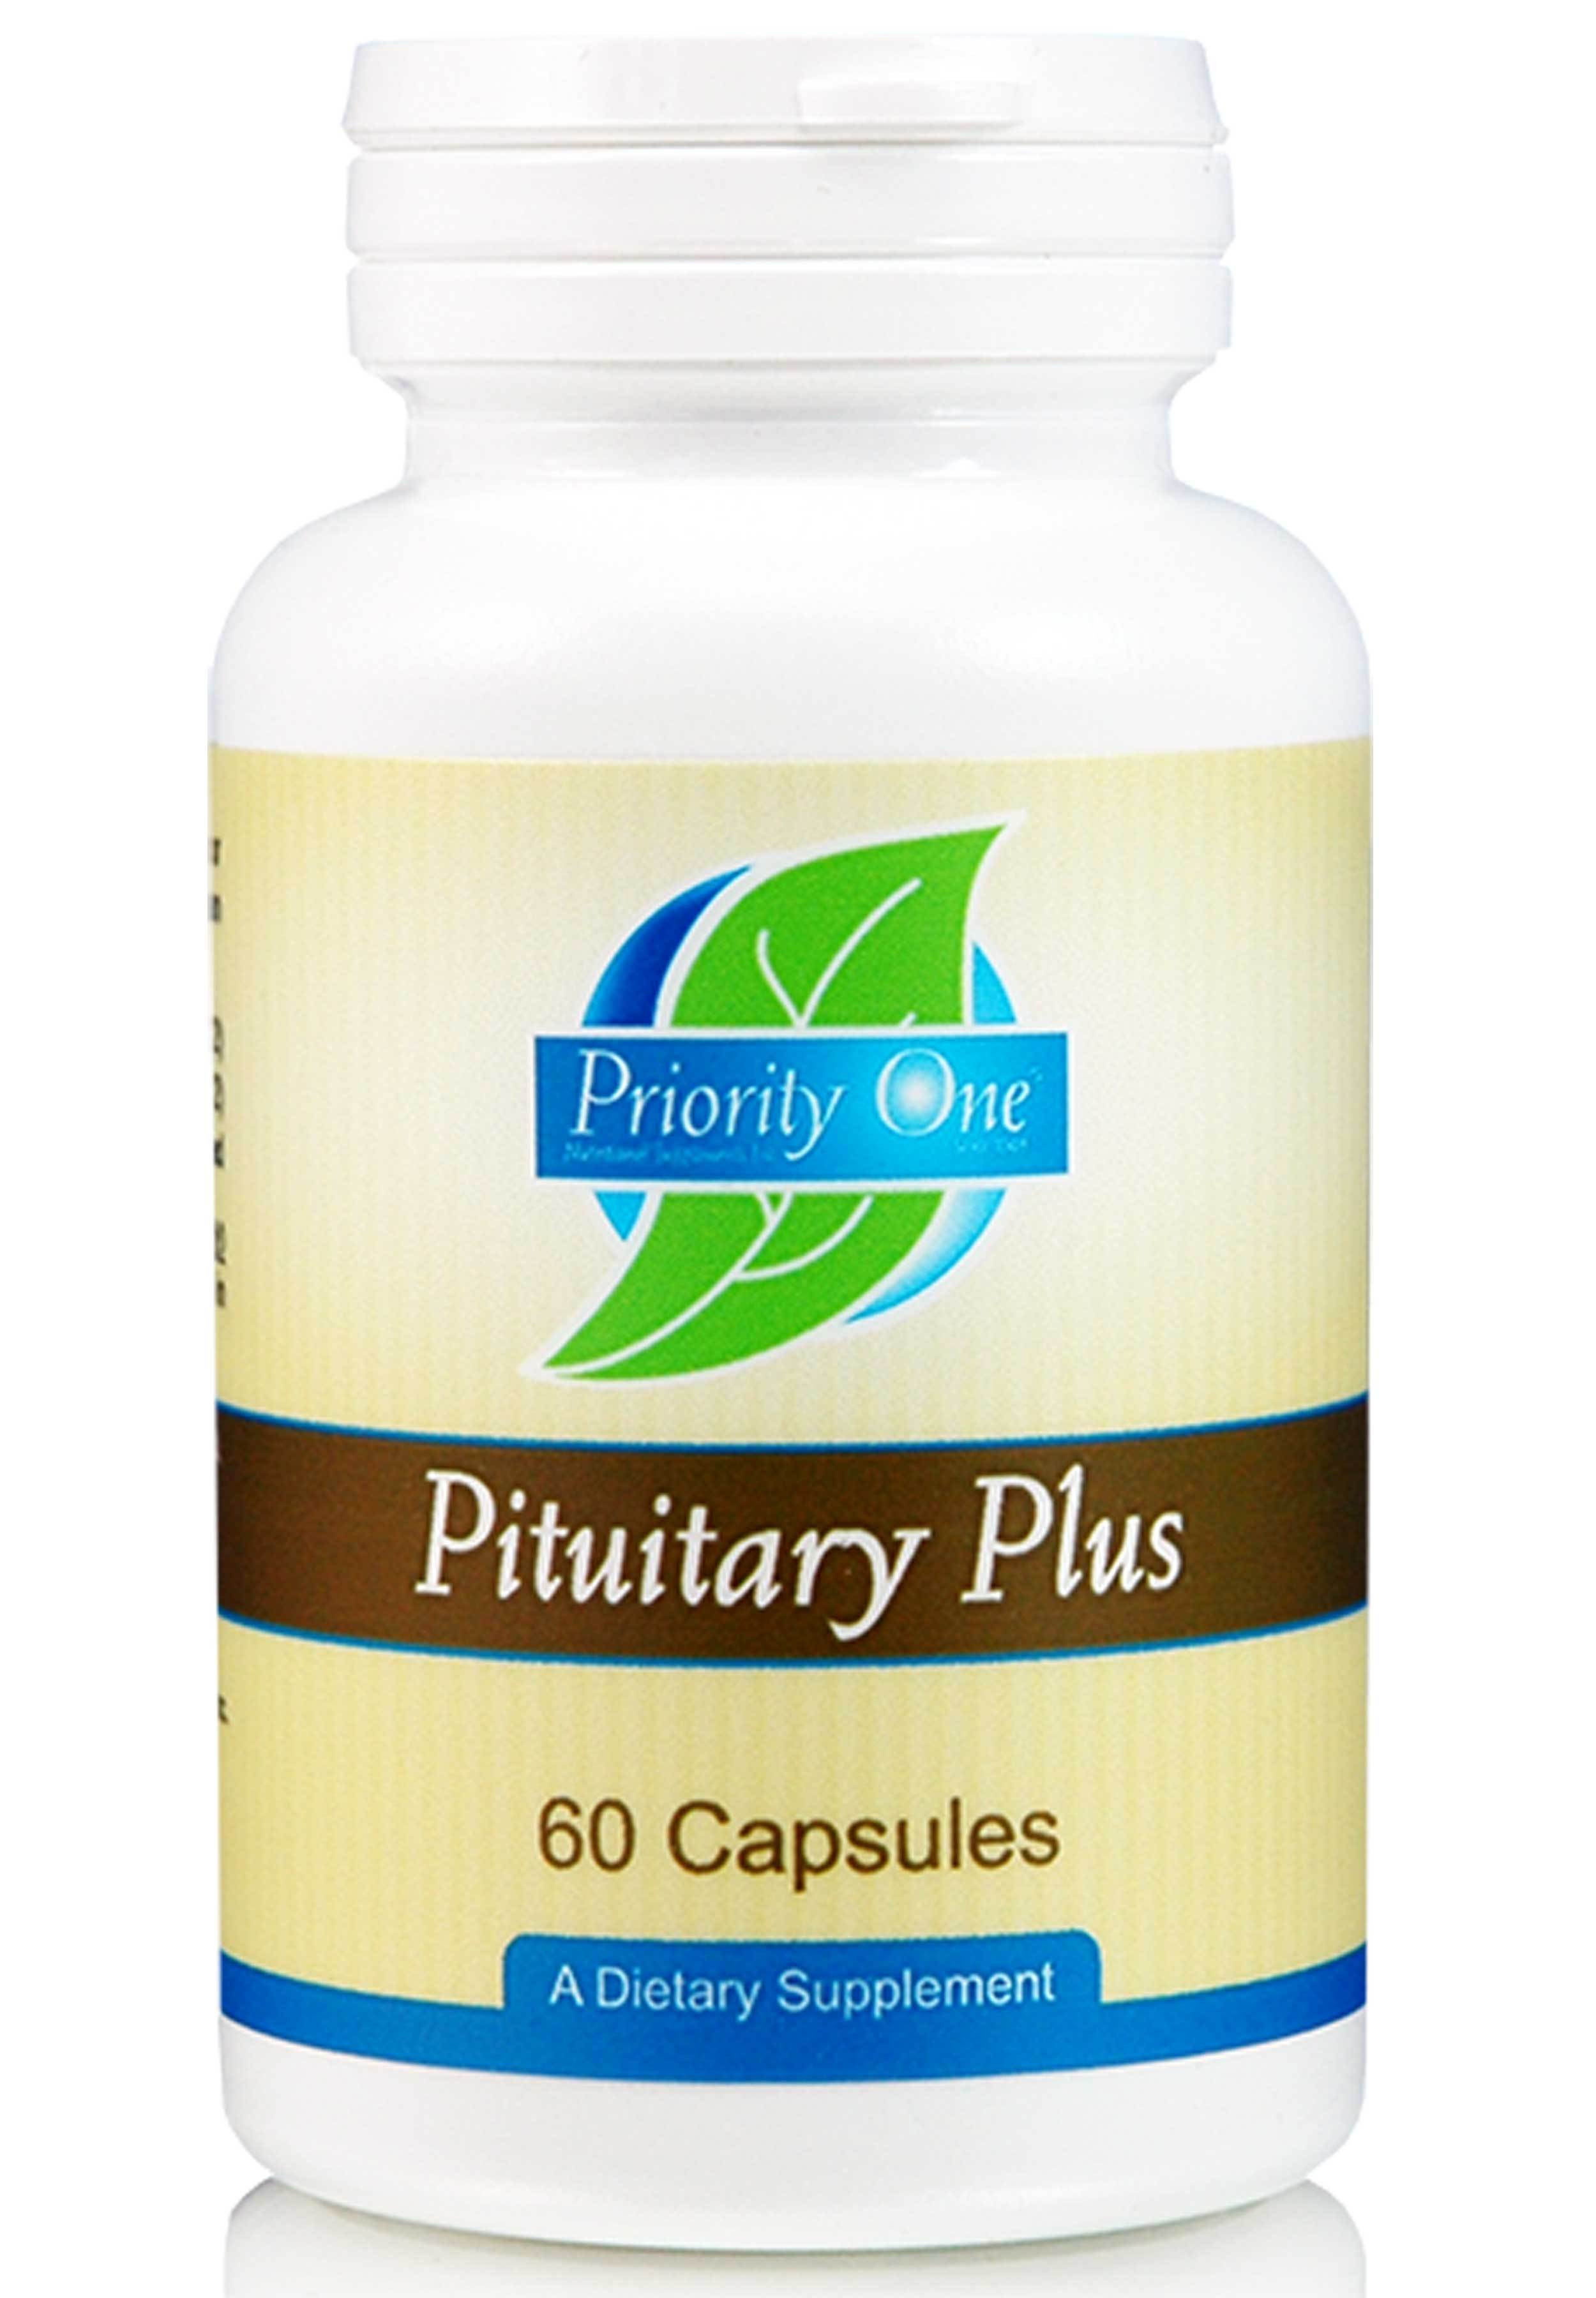 Priority One Pituitary Plus